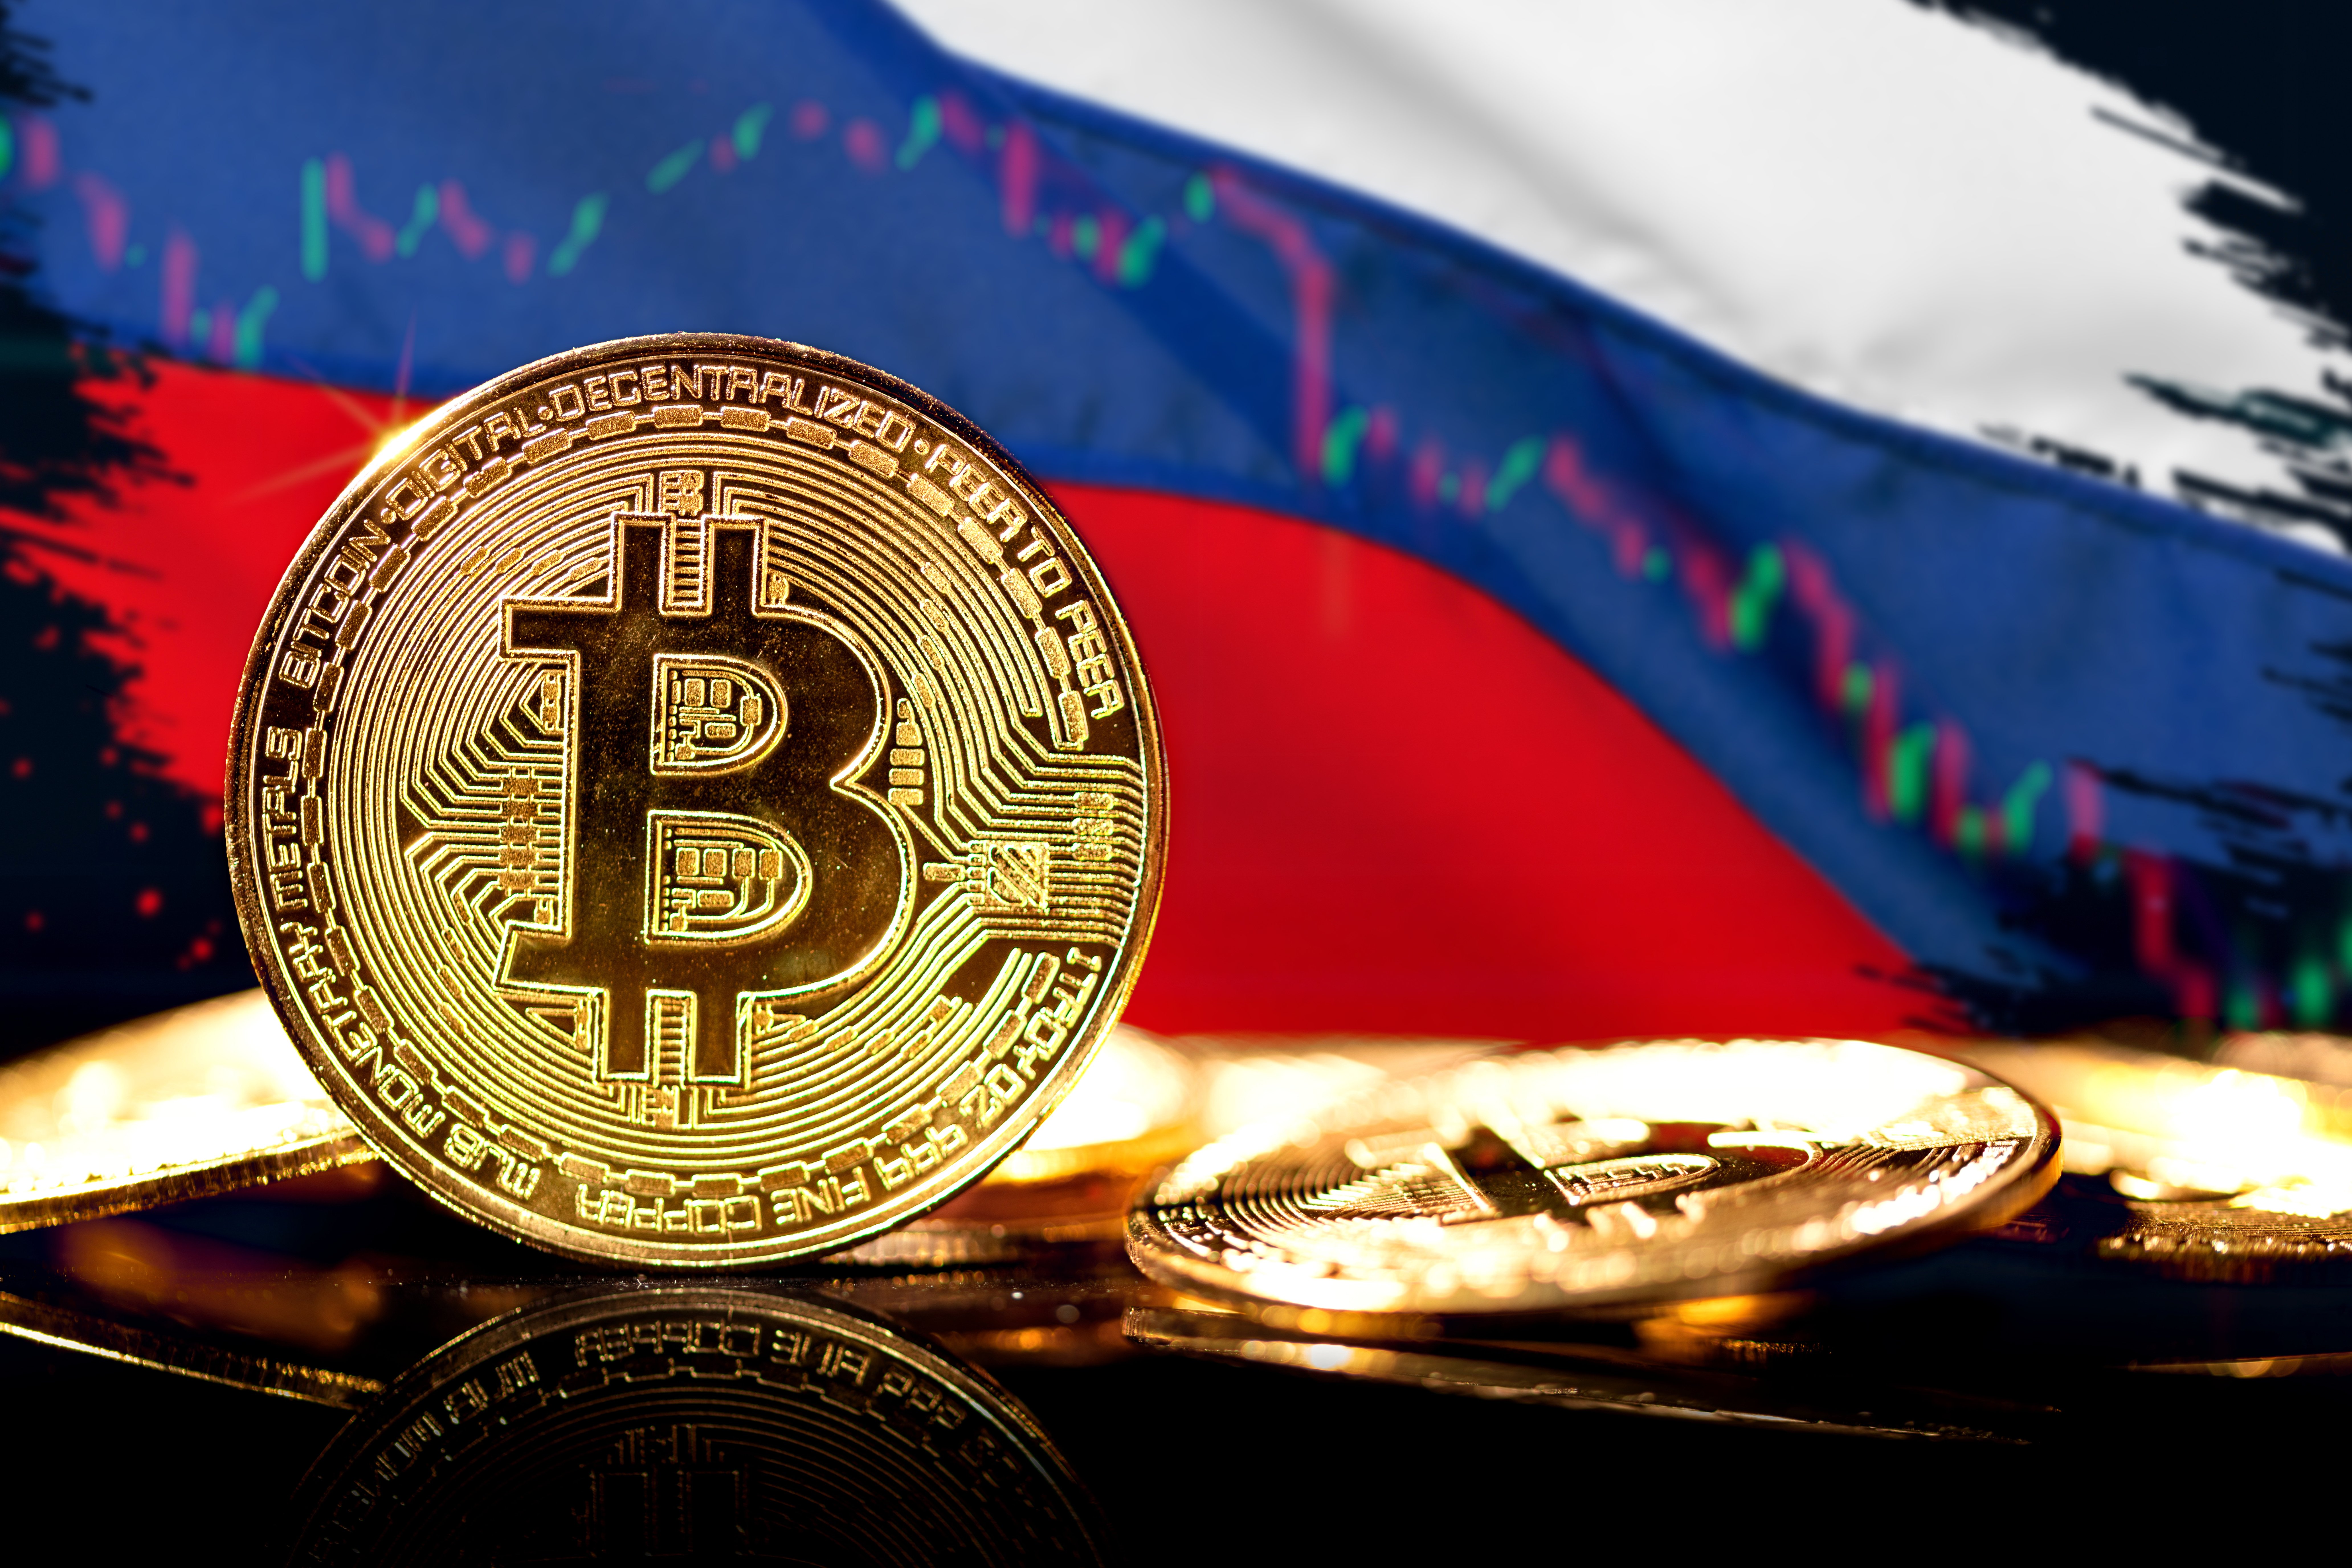 An artistic representations of a Bitcoin token, against a background of the Russian flag and a line chart.